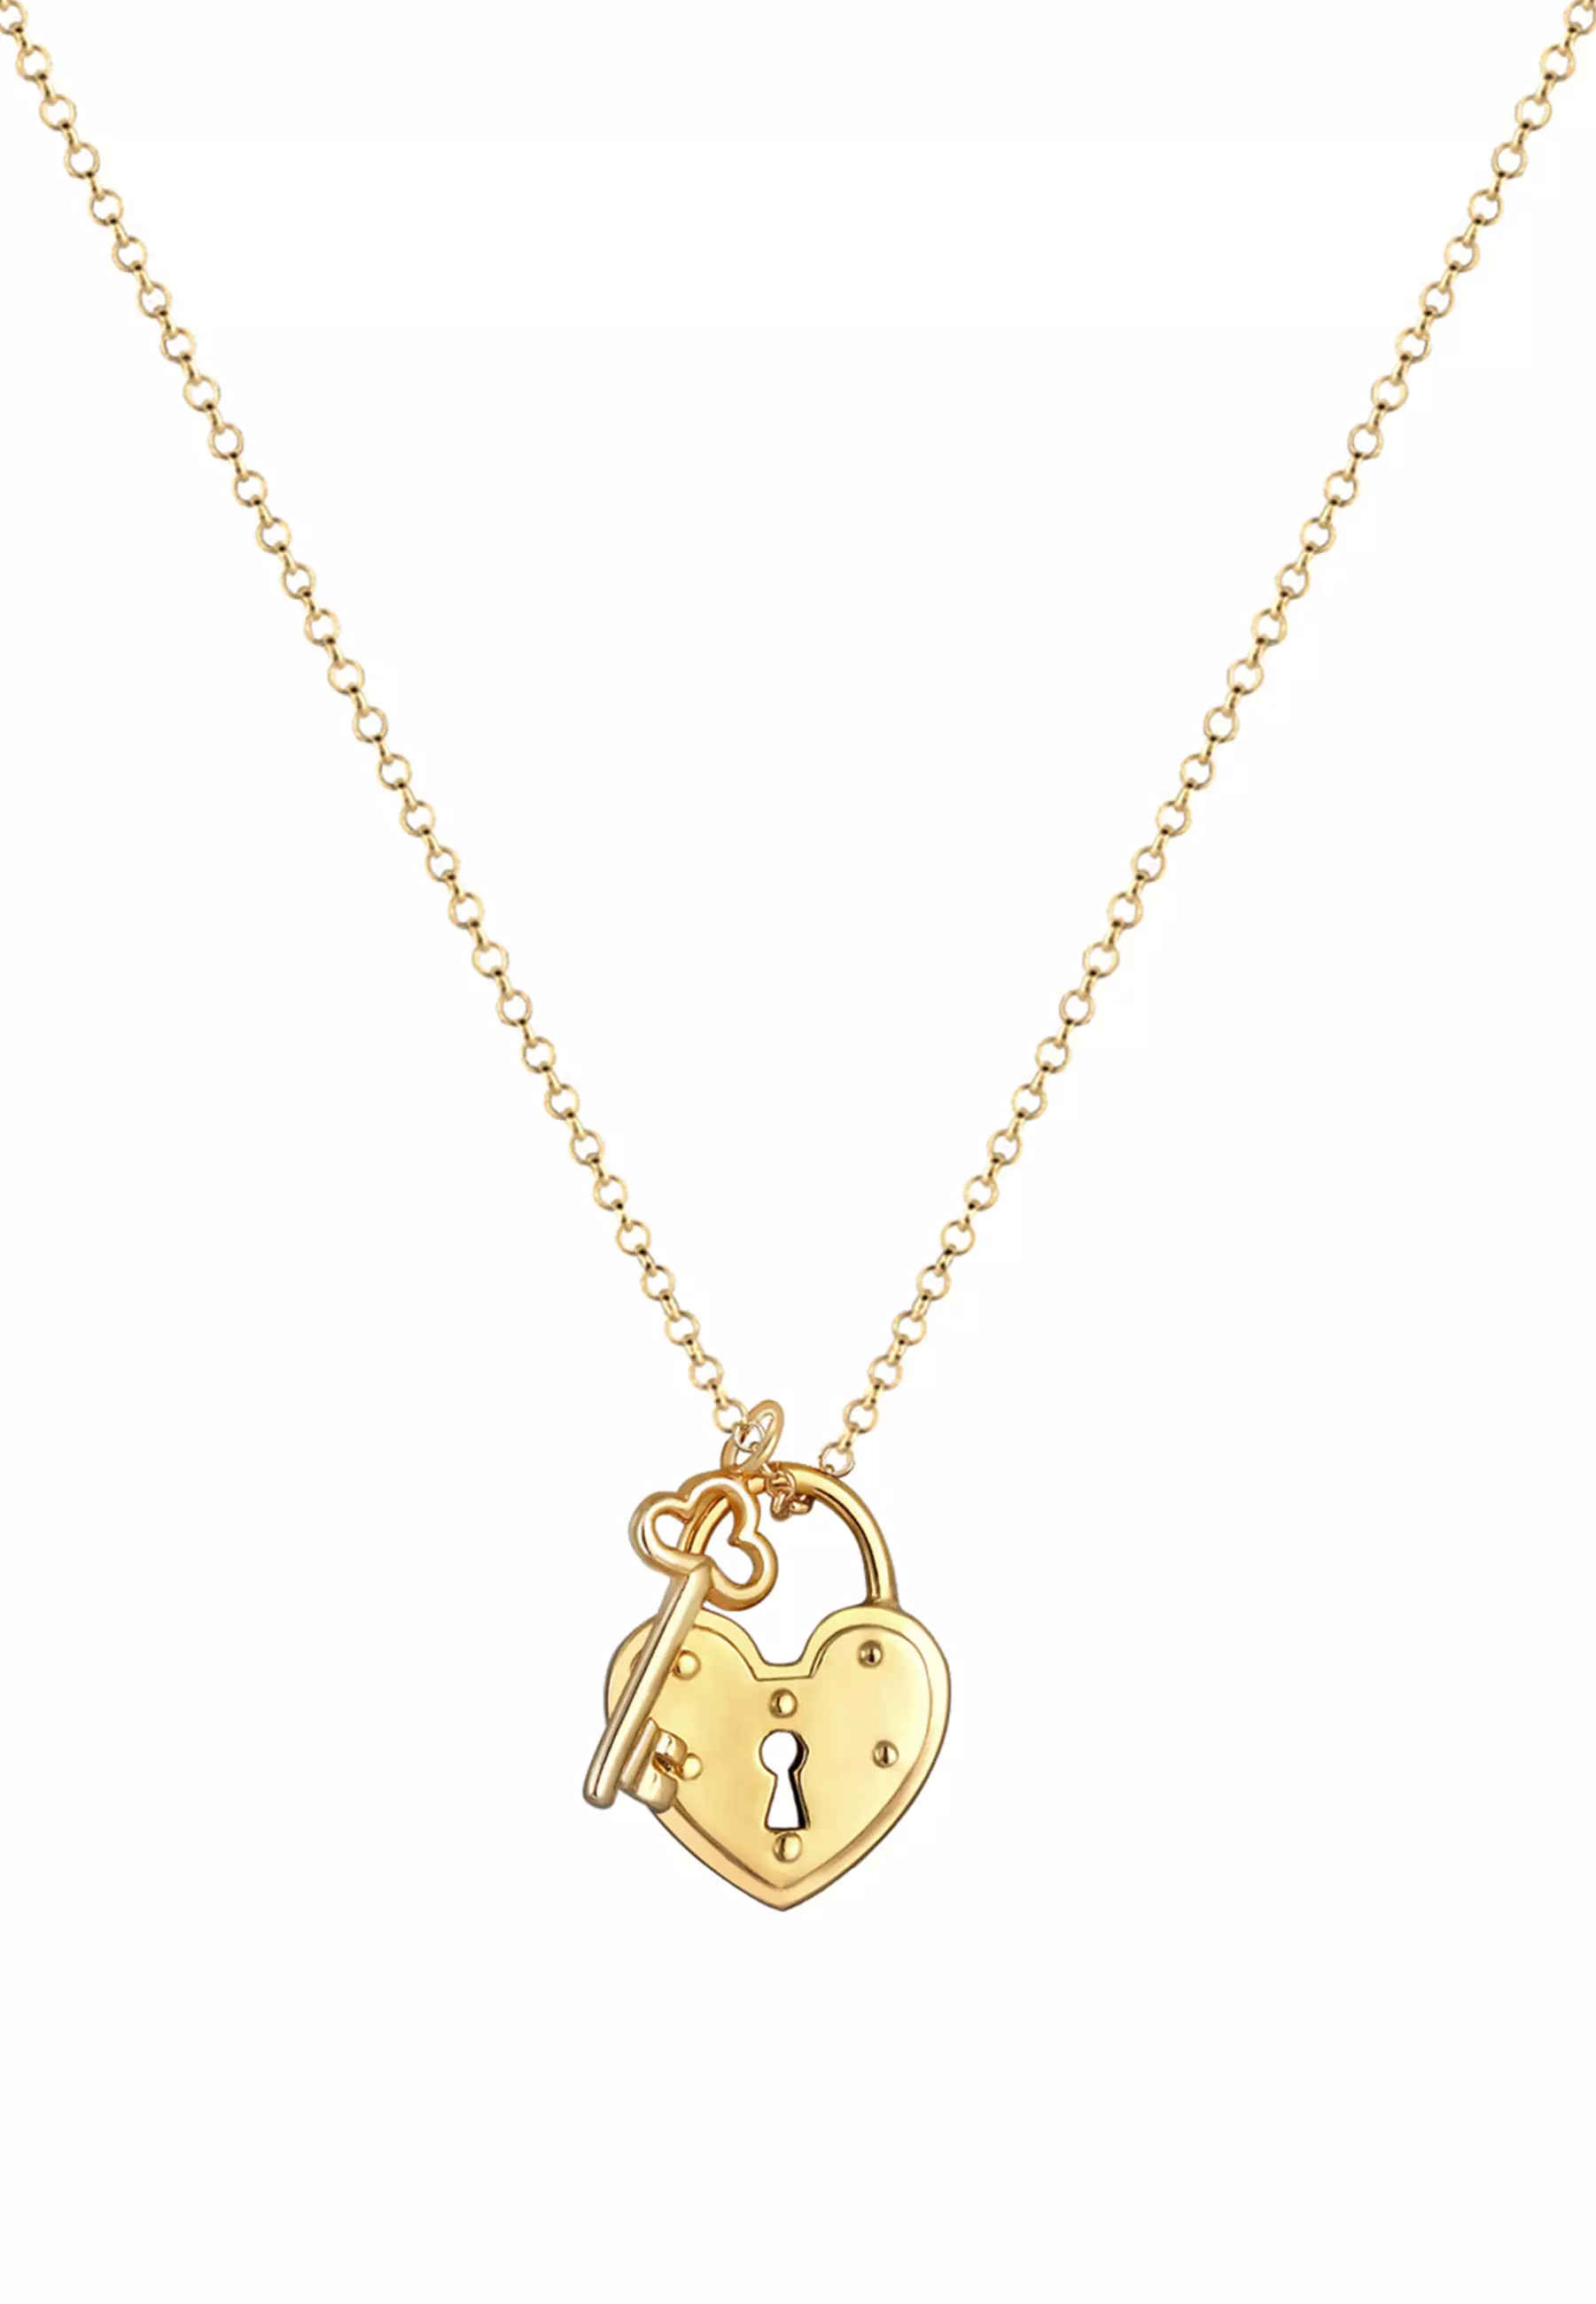 Necklace Lock Key Heart Love Gold Plated